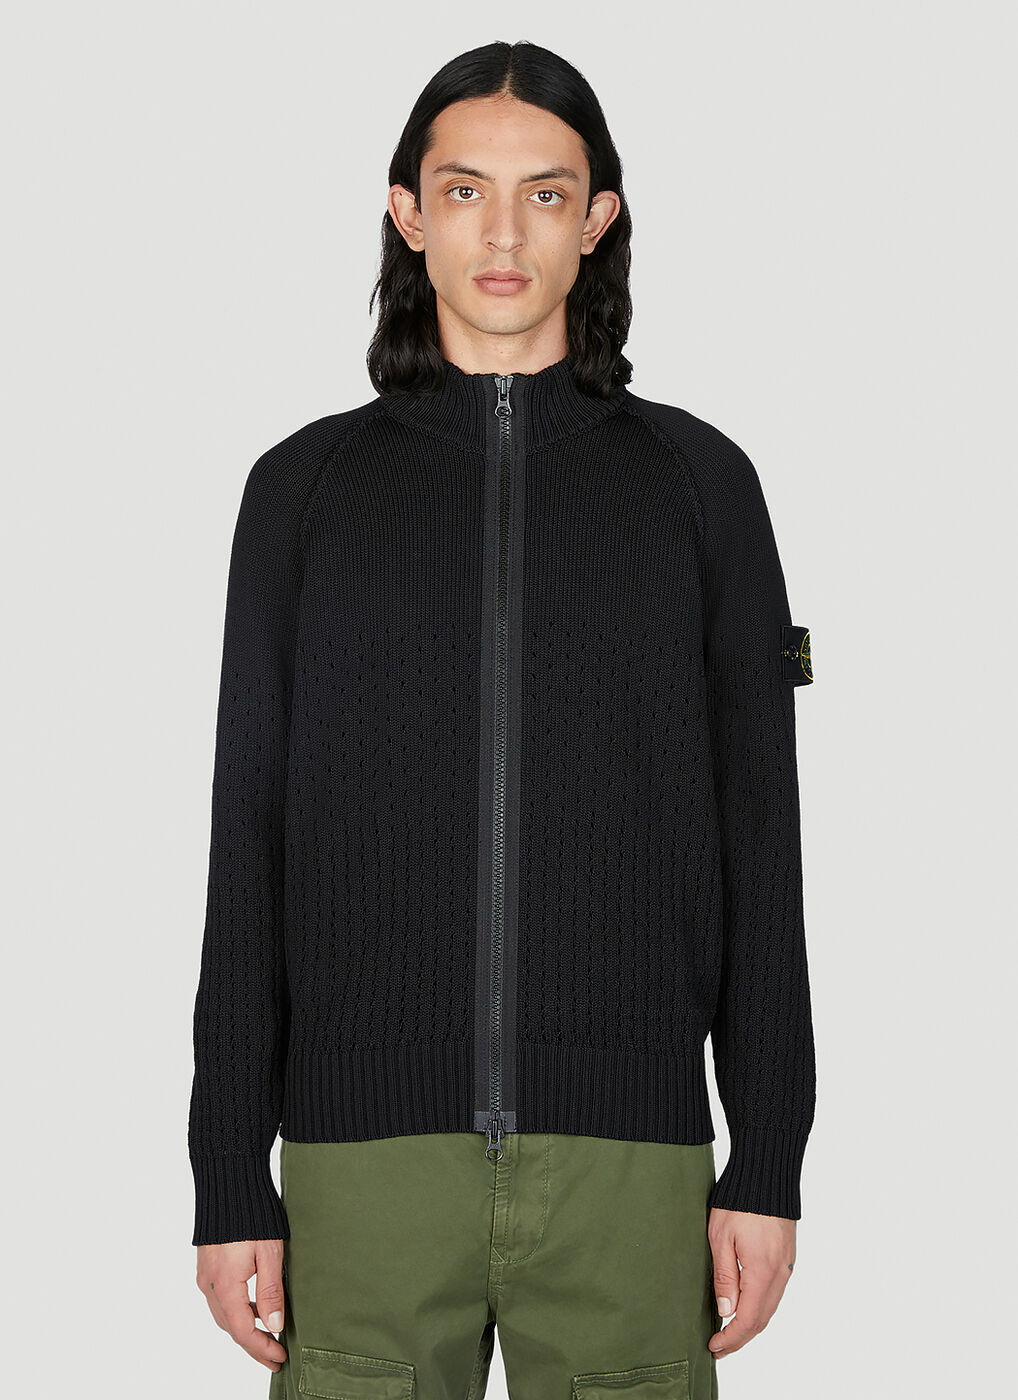 Stone Island - Compass Patch Zip Up Sweater in Black Stone Island